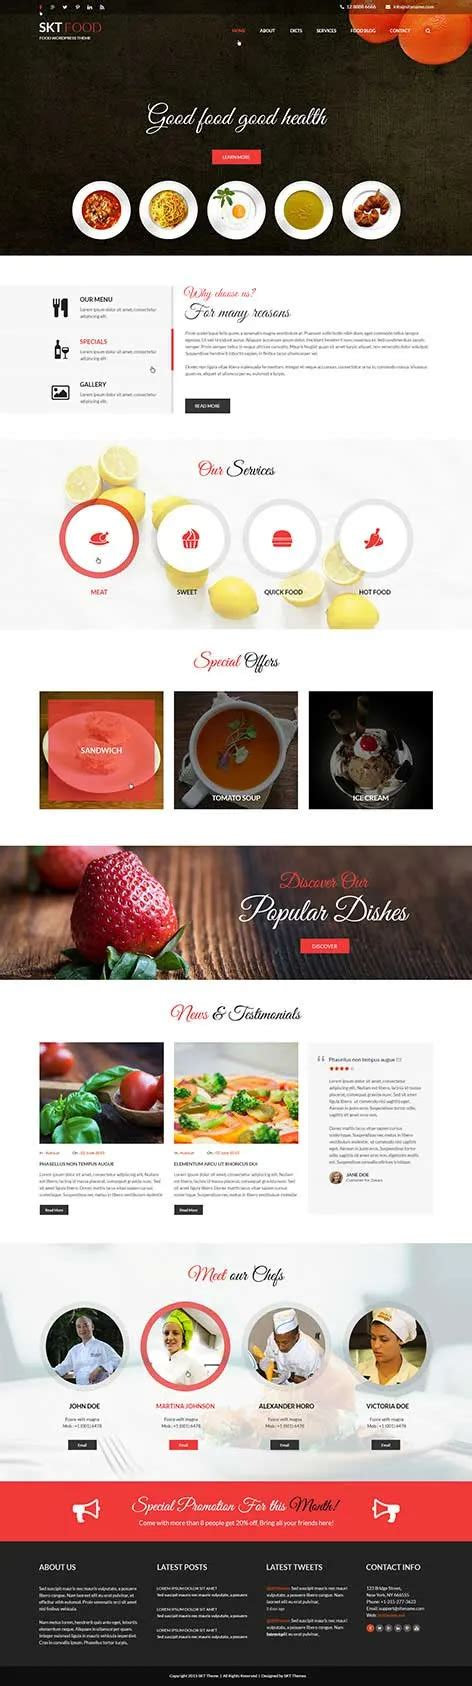 Best Food And Recipes Wordpress Theme Blogging Delivery